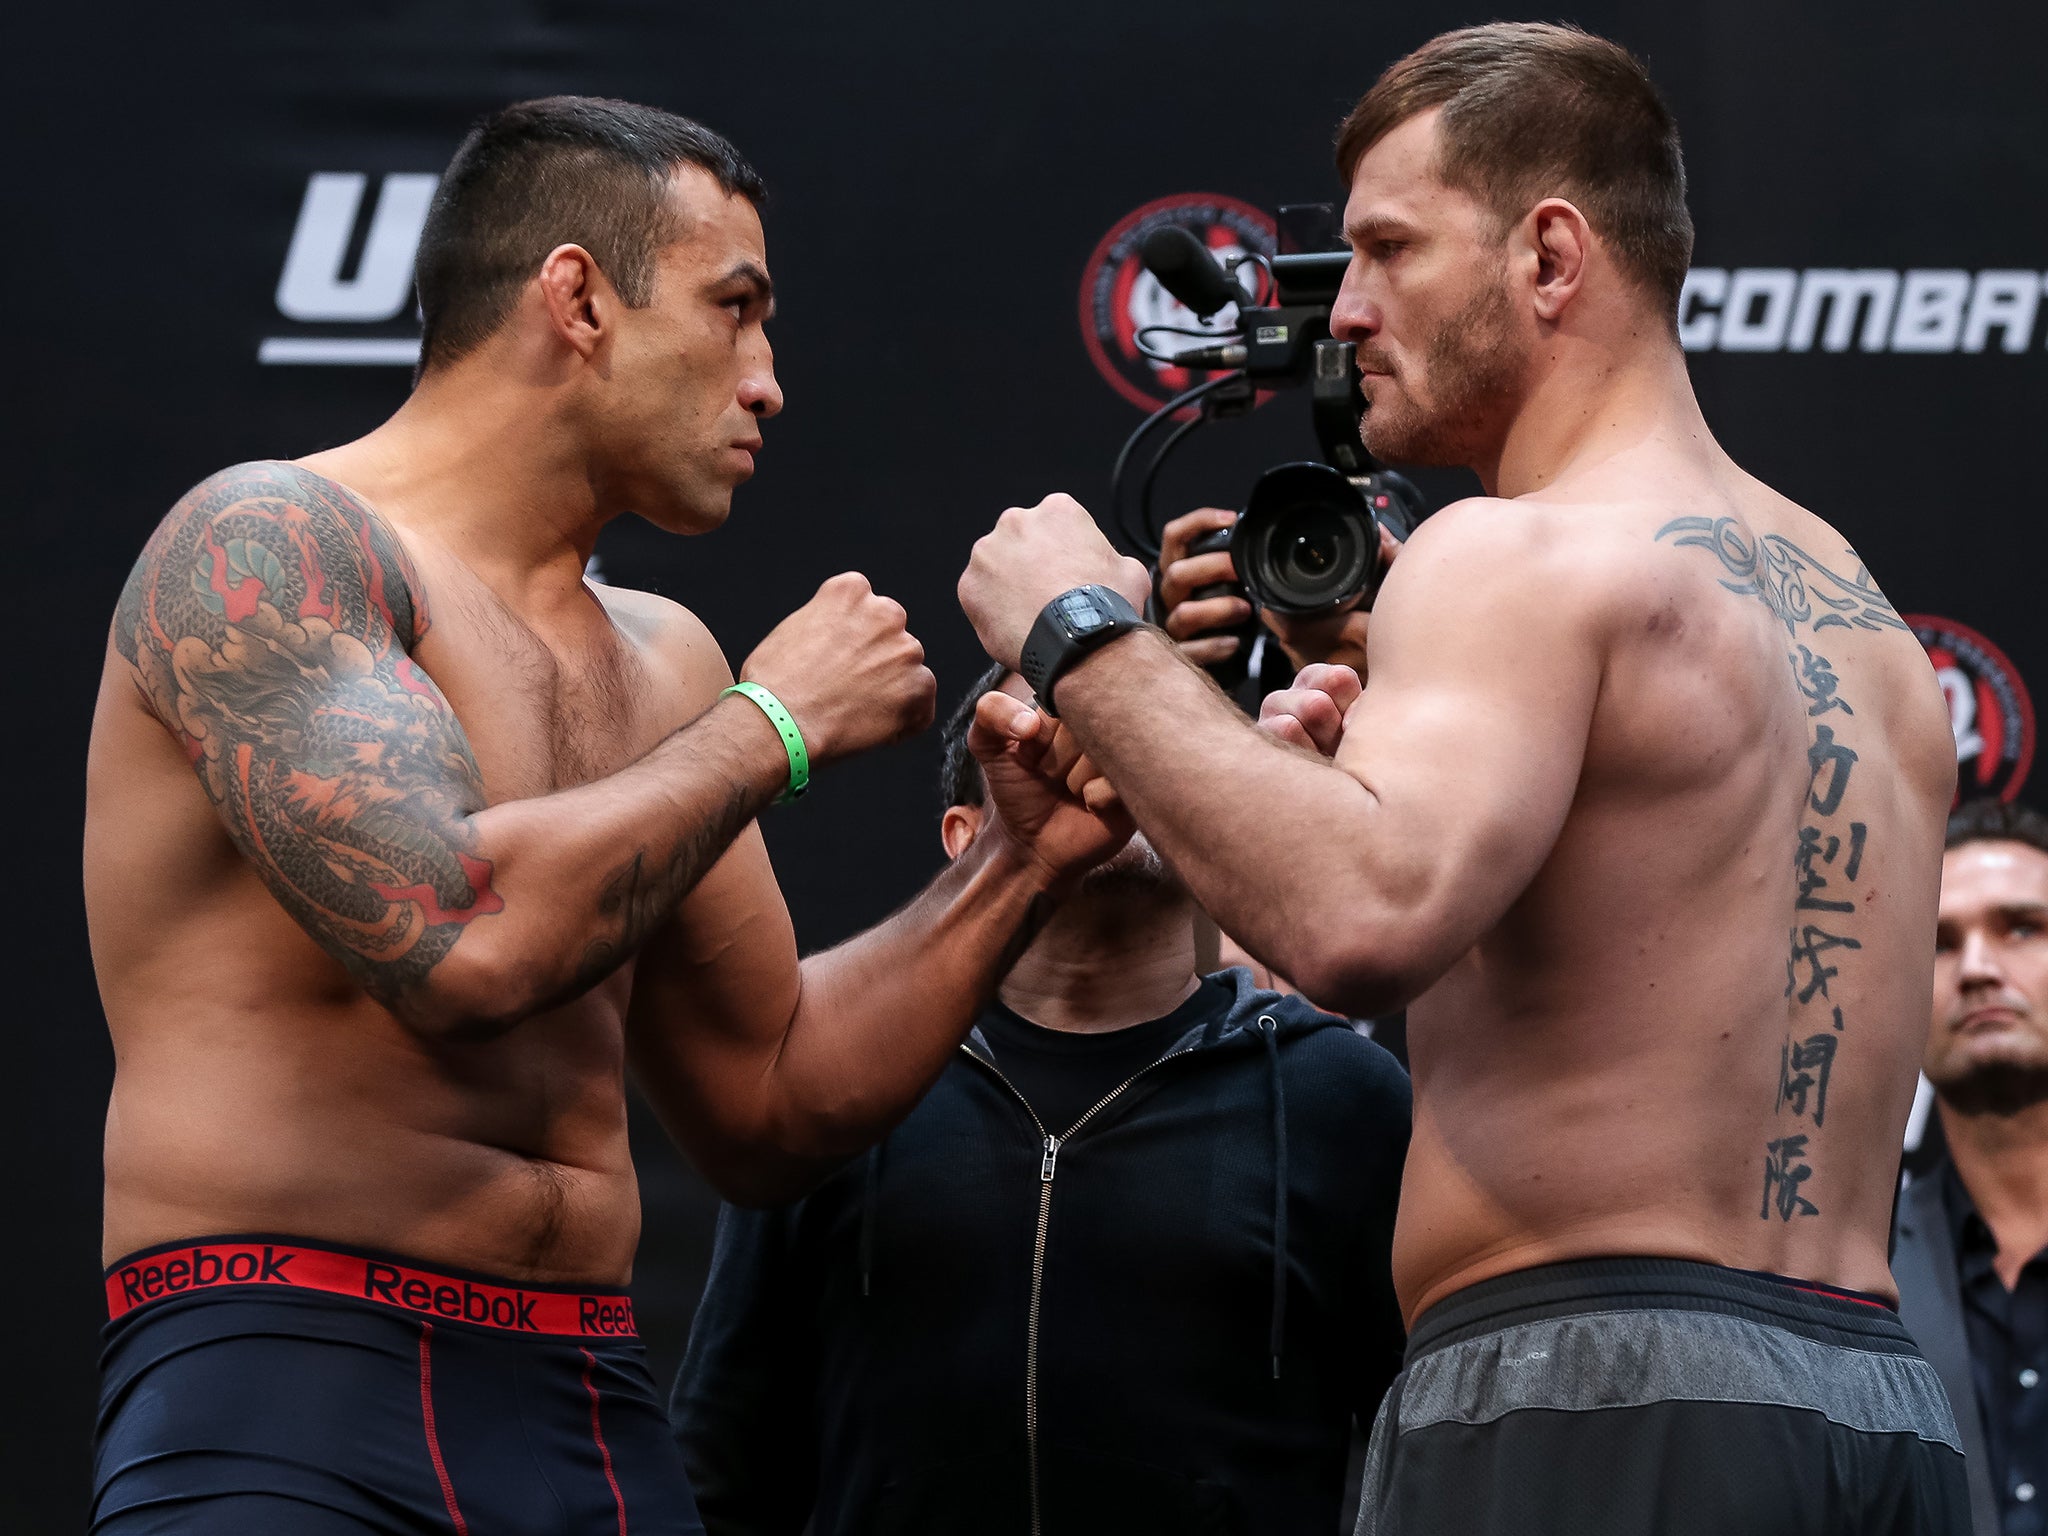 Fabricio Werdum and Stipe Miocic face off during the UFC 198 weigh-in